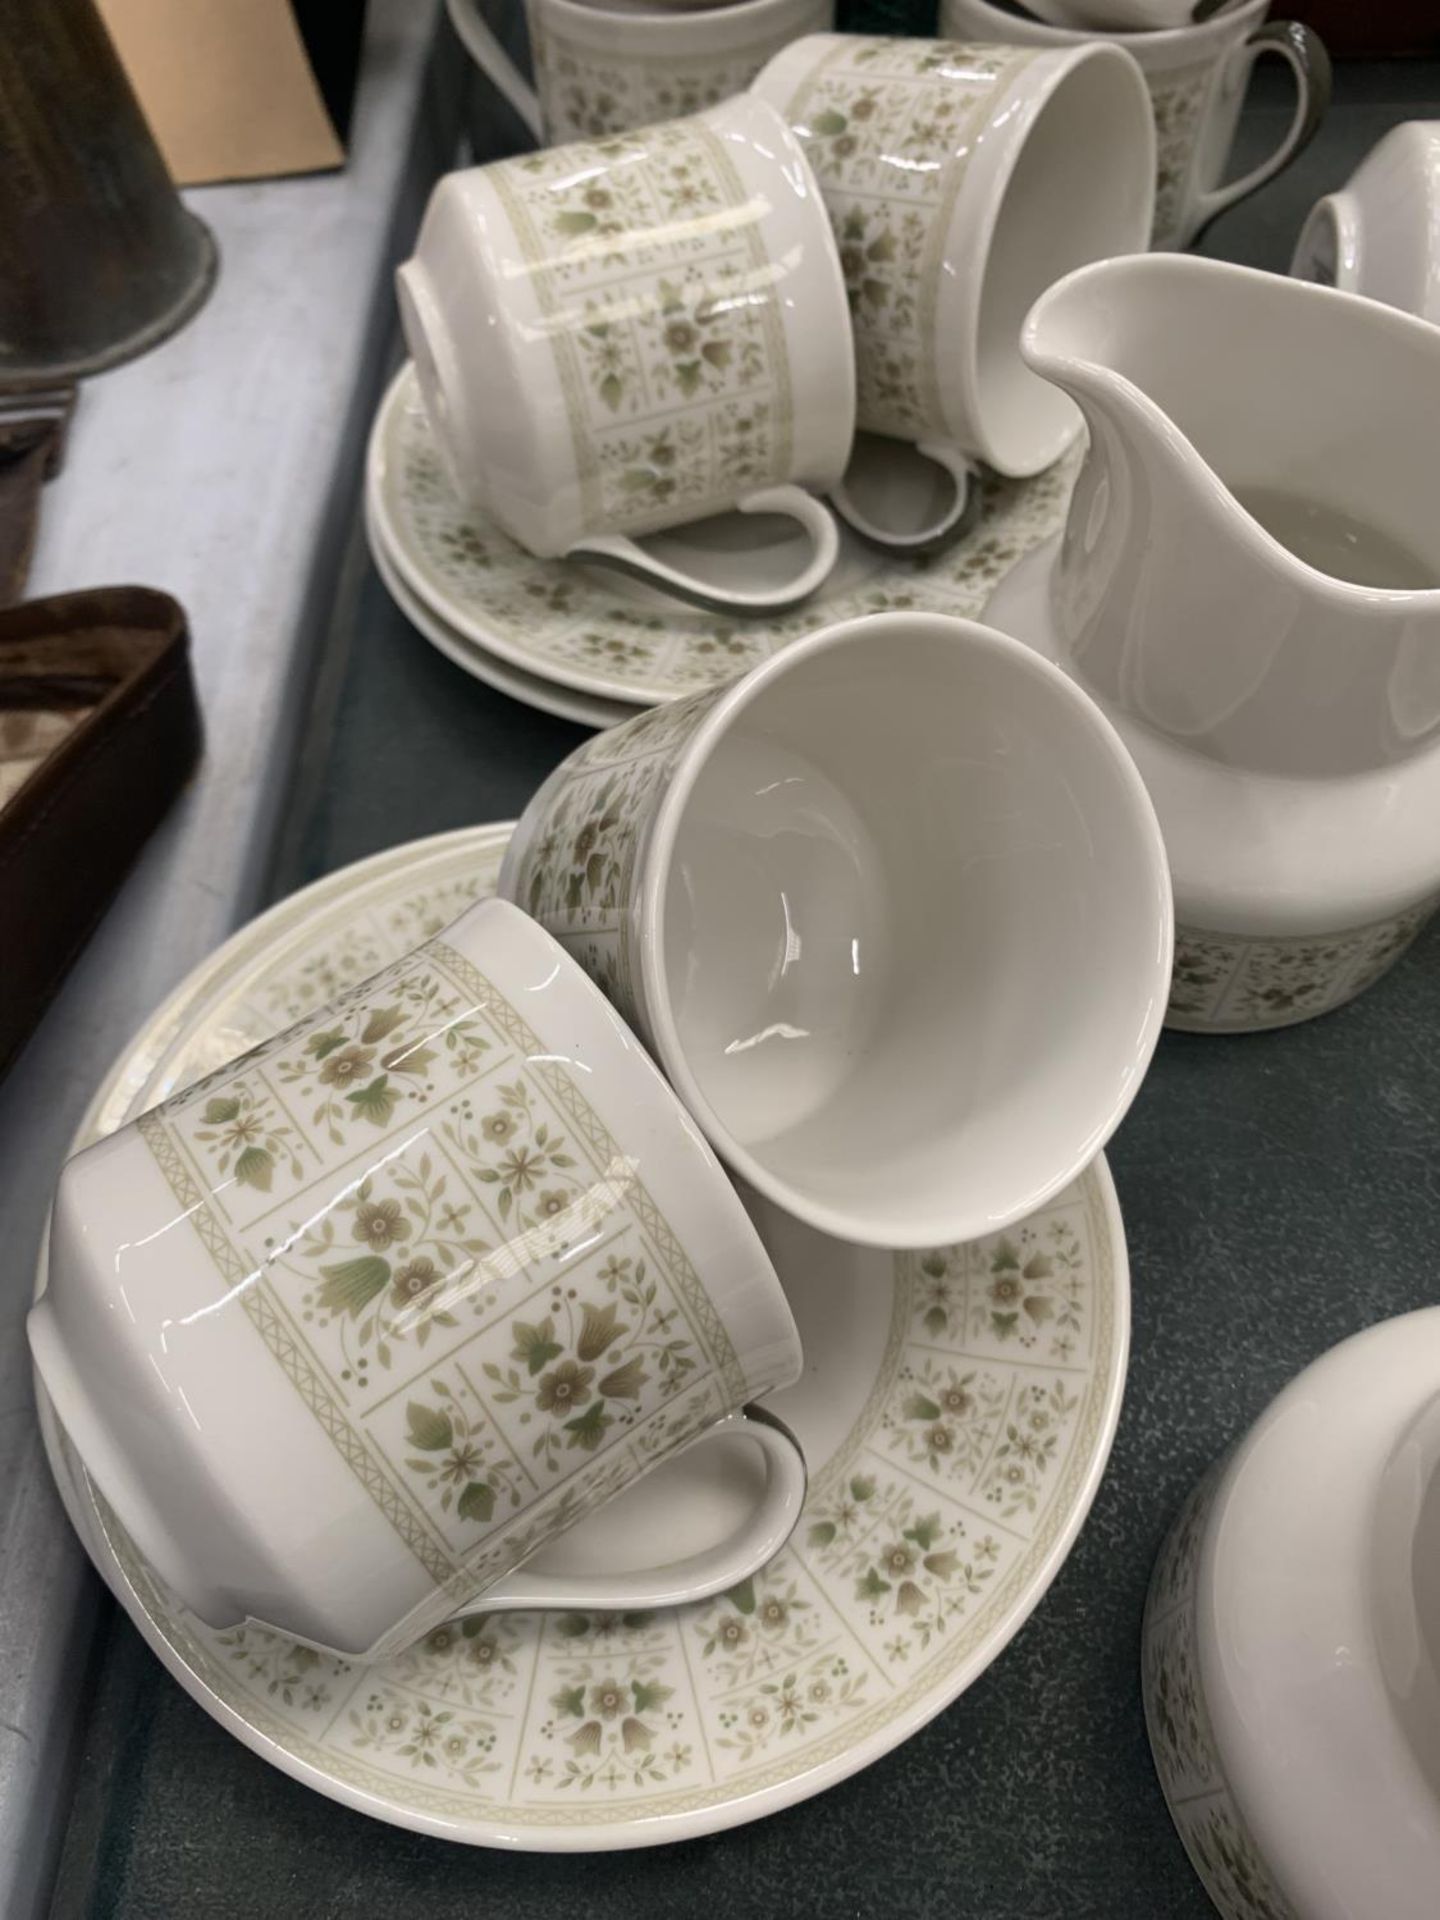 A ROYAL DOULTON 'SAMARRA' PART TEASET TO INCLUDE CUPS, SAUCERS AND CREAM JUGS - Image 2 of 5